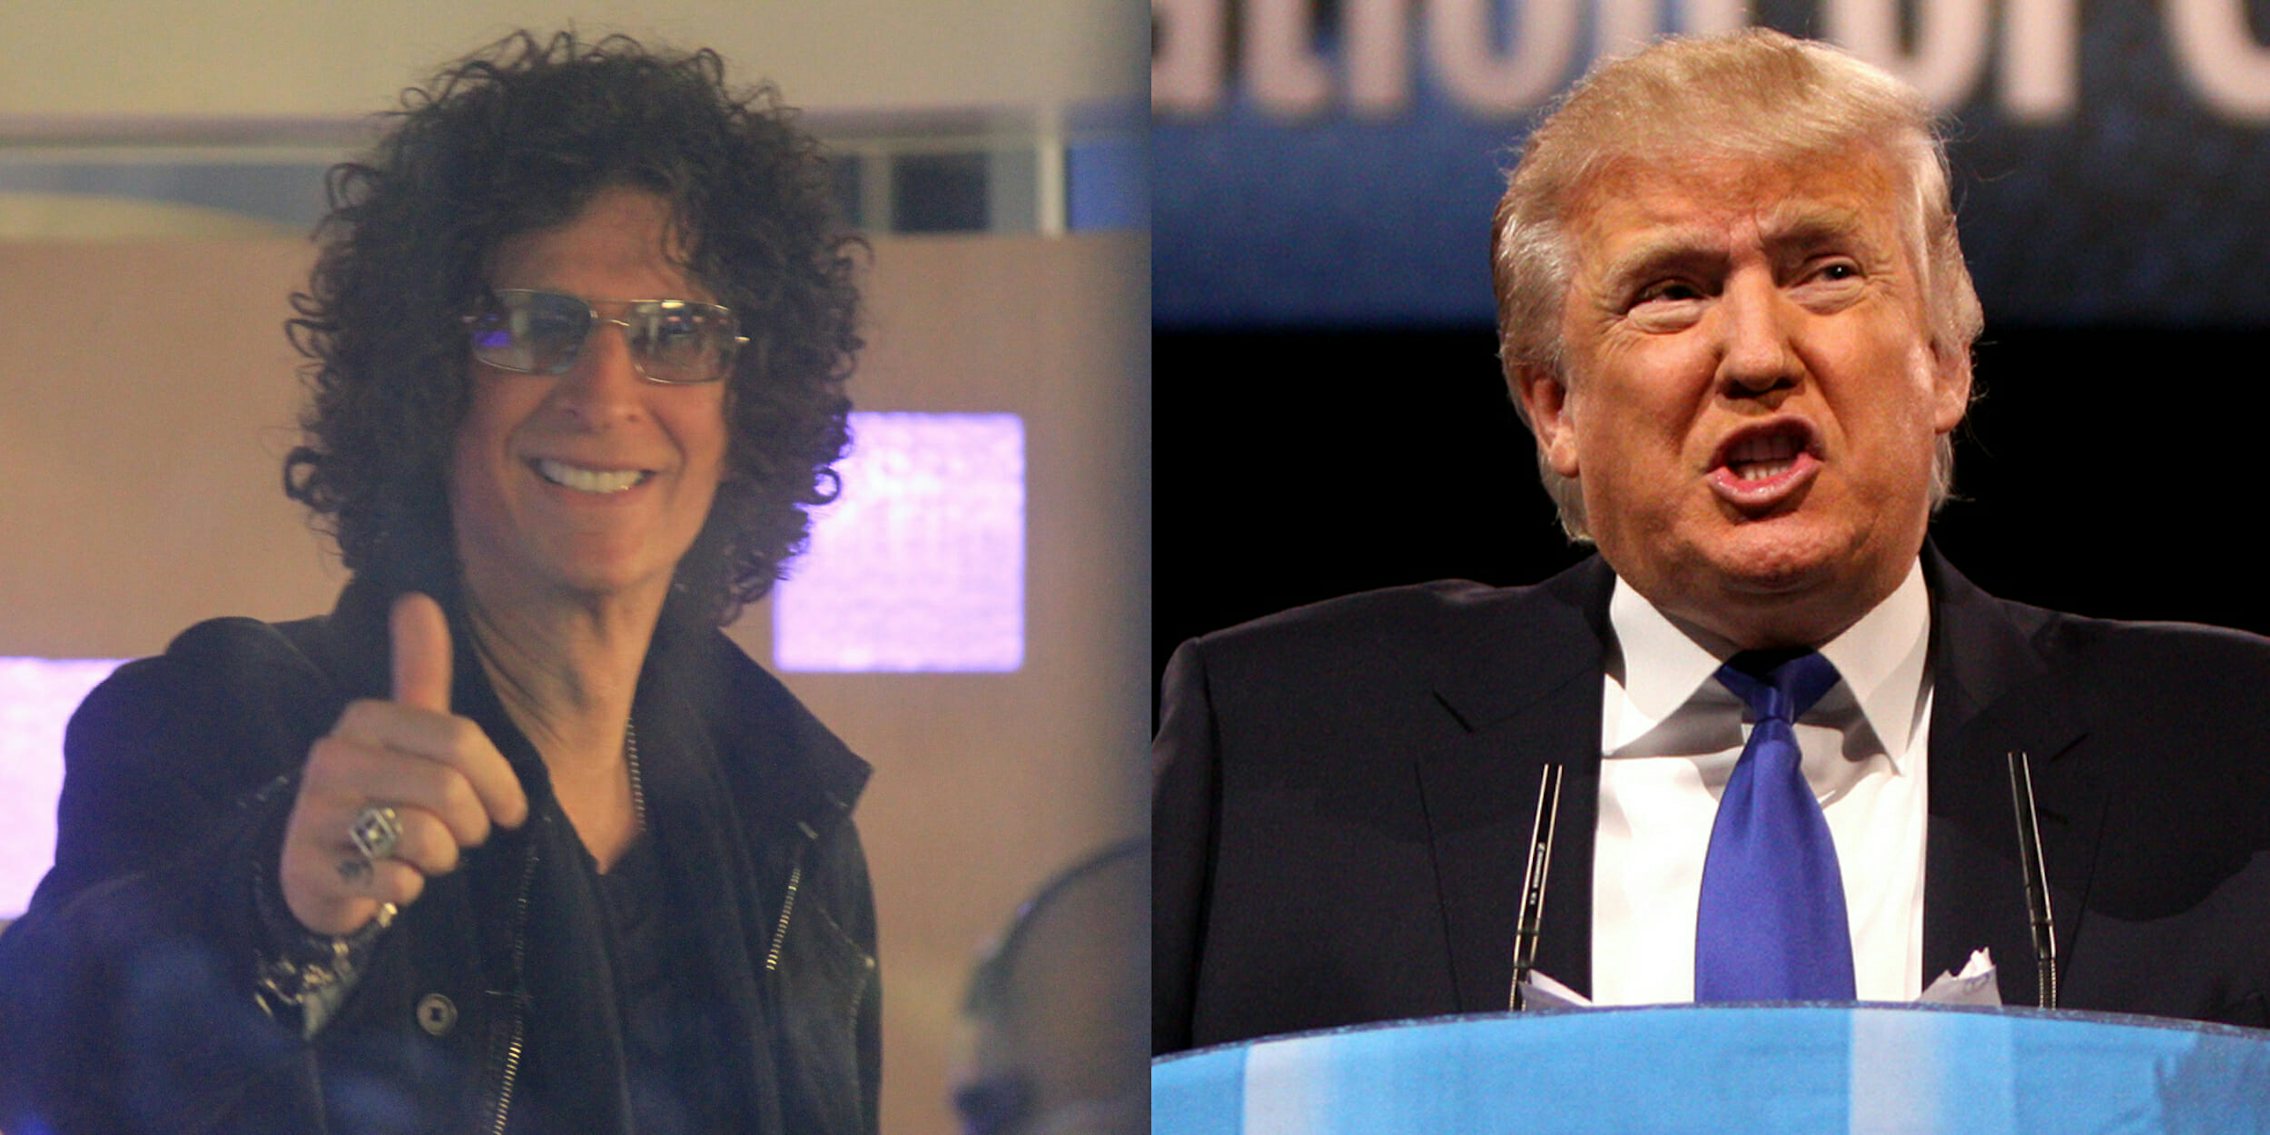 Howard Stern and Donald Trump